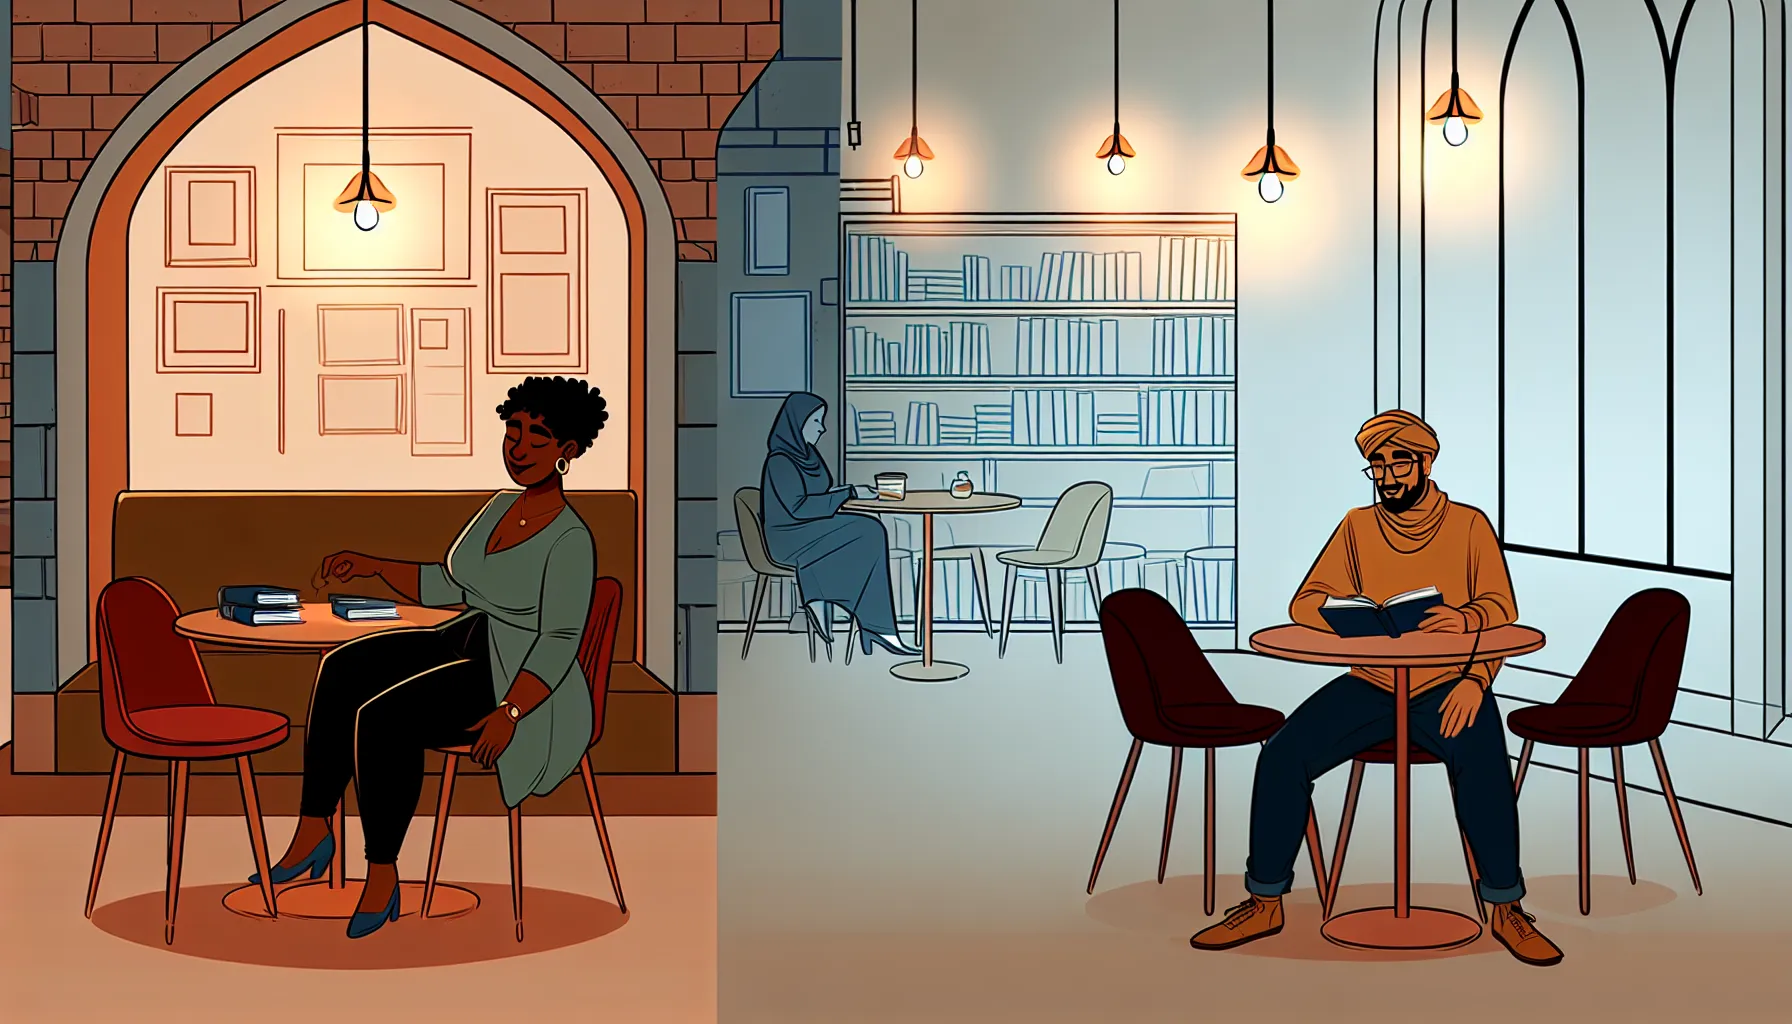 Private and heartfelt conversation at a serene coffee shop